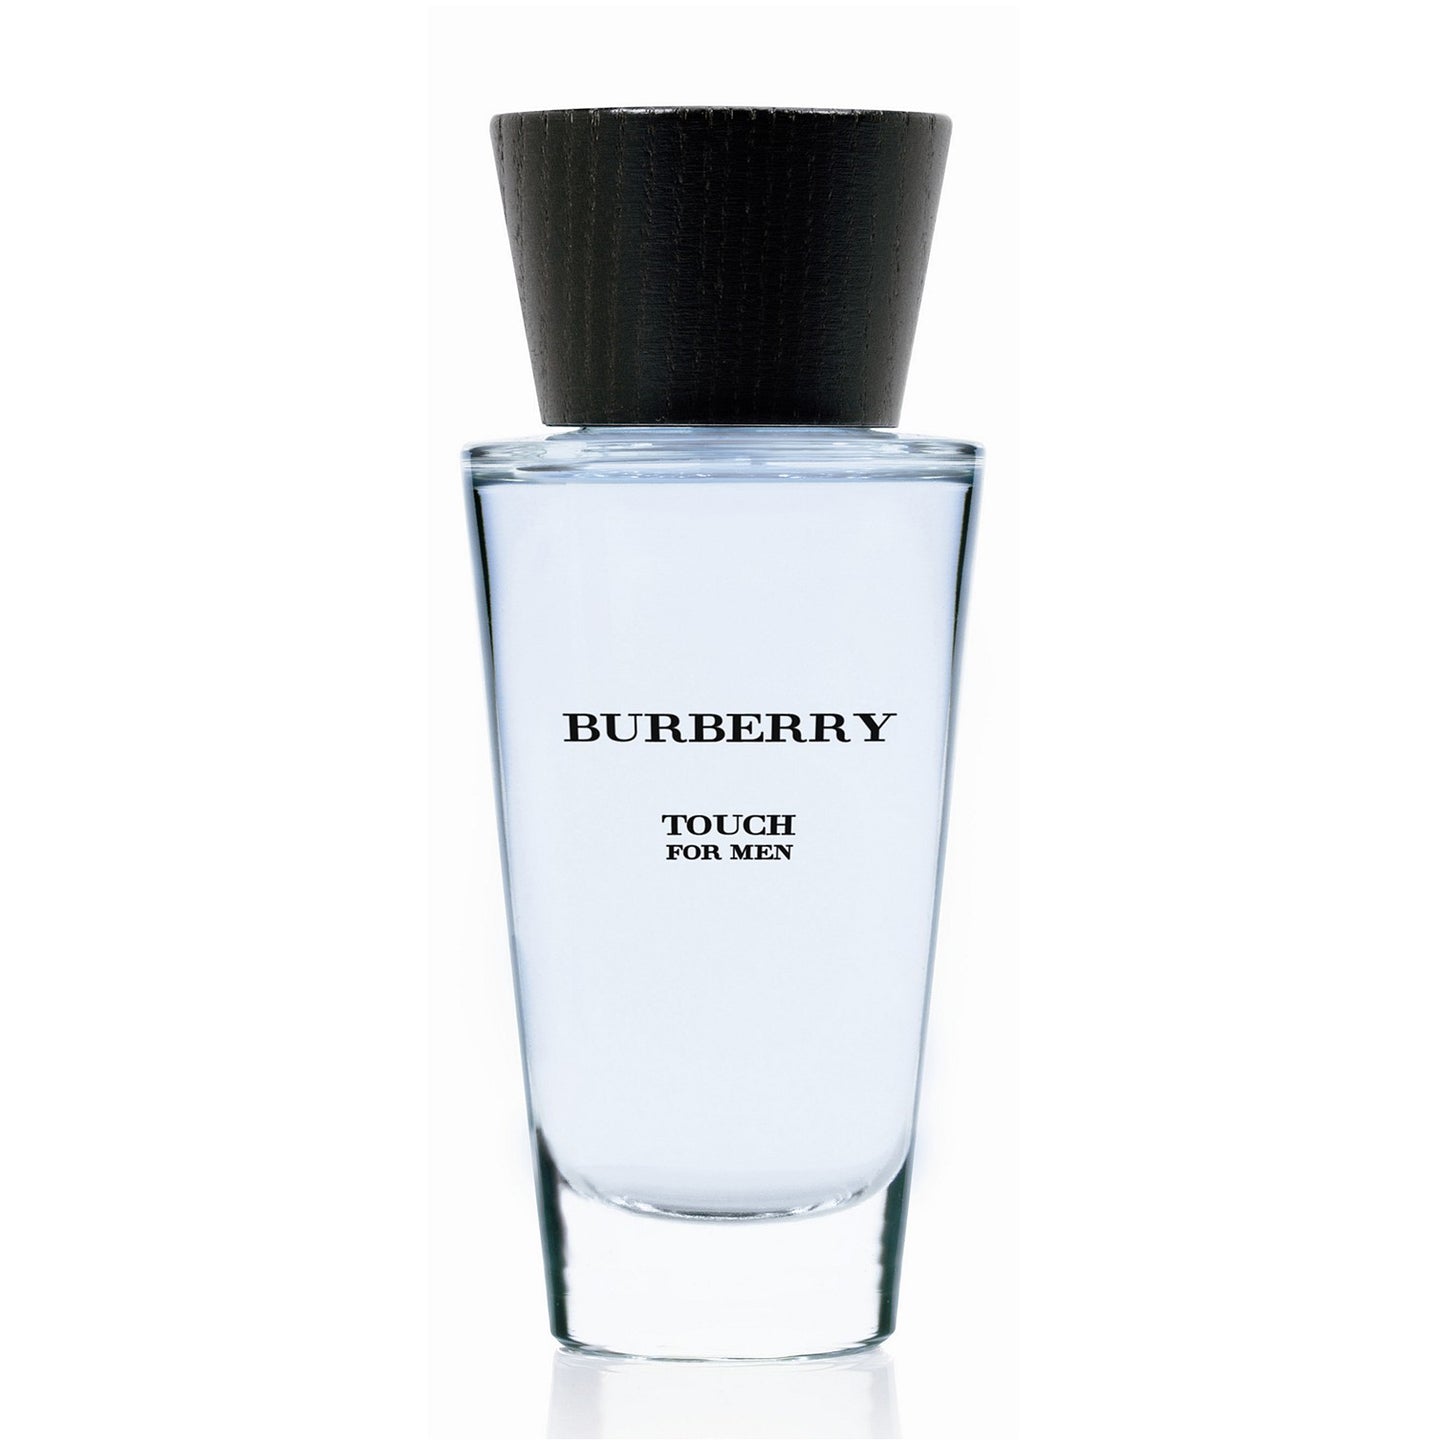 Burberry touch for men EDT 100 ml 3.3 oz